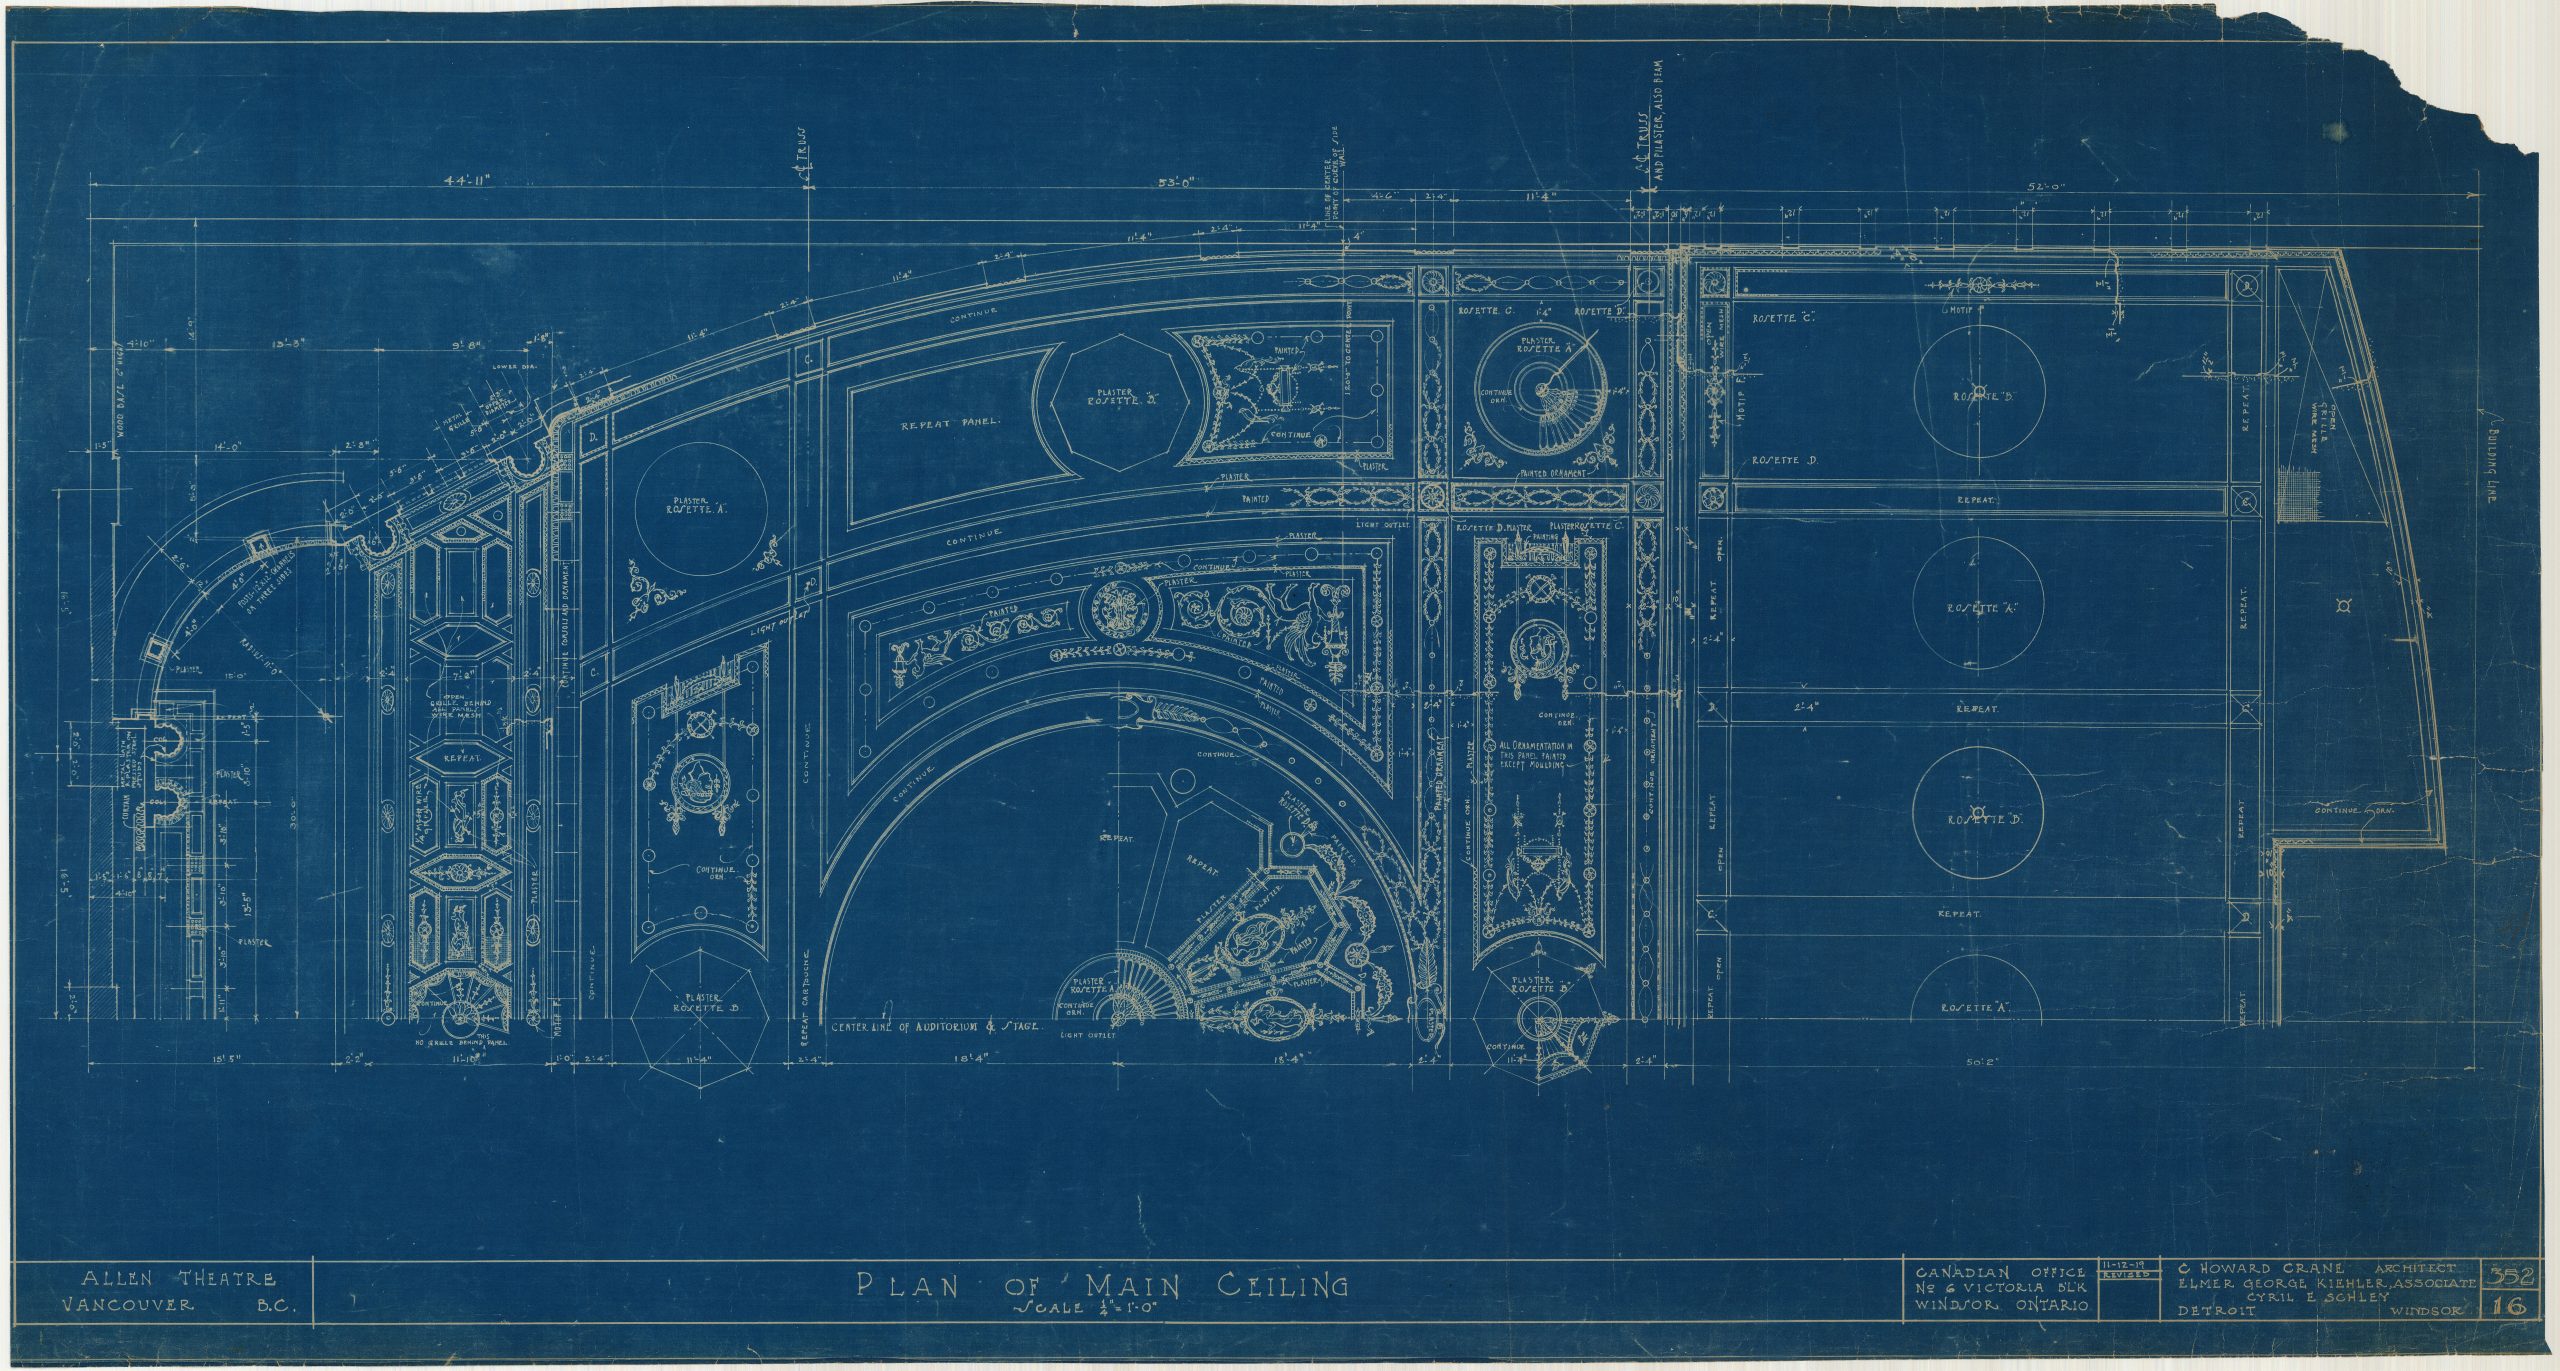 Plan of Allen Theatre main ceiling. Reference code: COV-S393-1-A9-0056-: LEG2285.10947